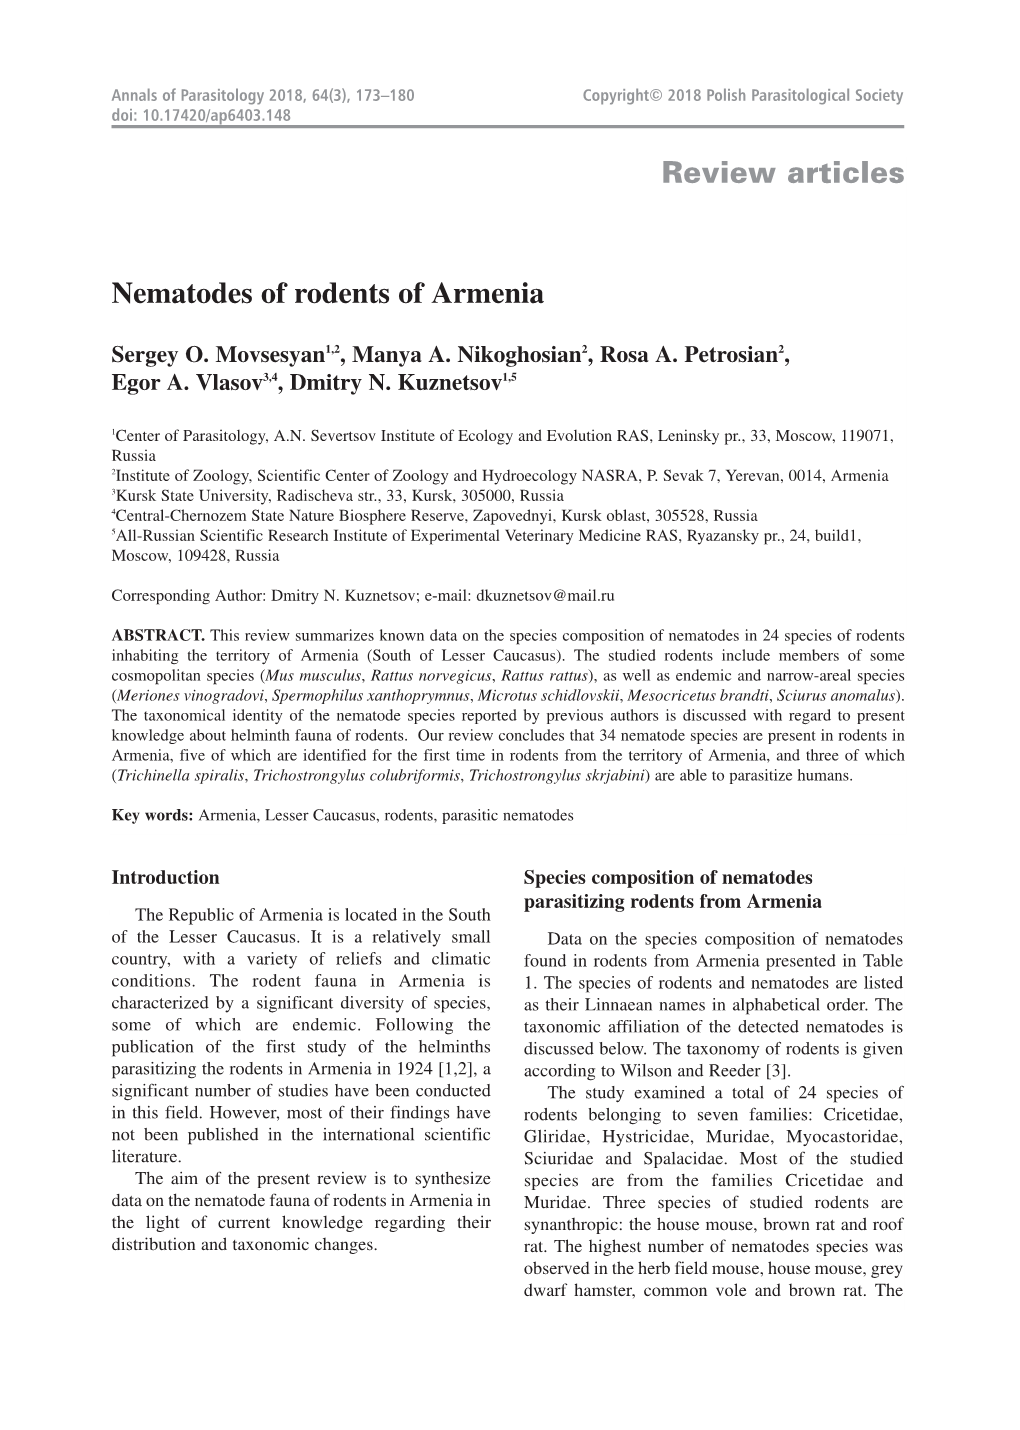 Review Articles Nematodes of Rodents of Armenia